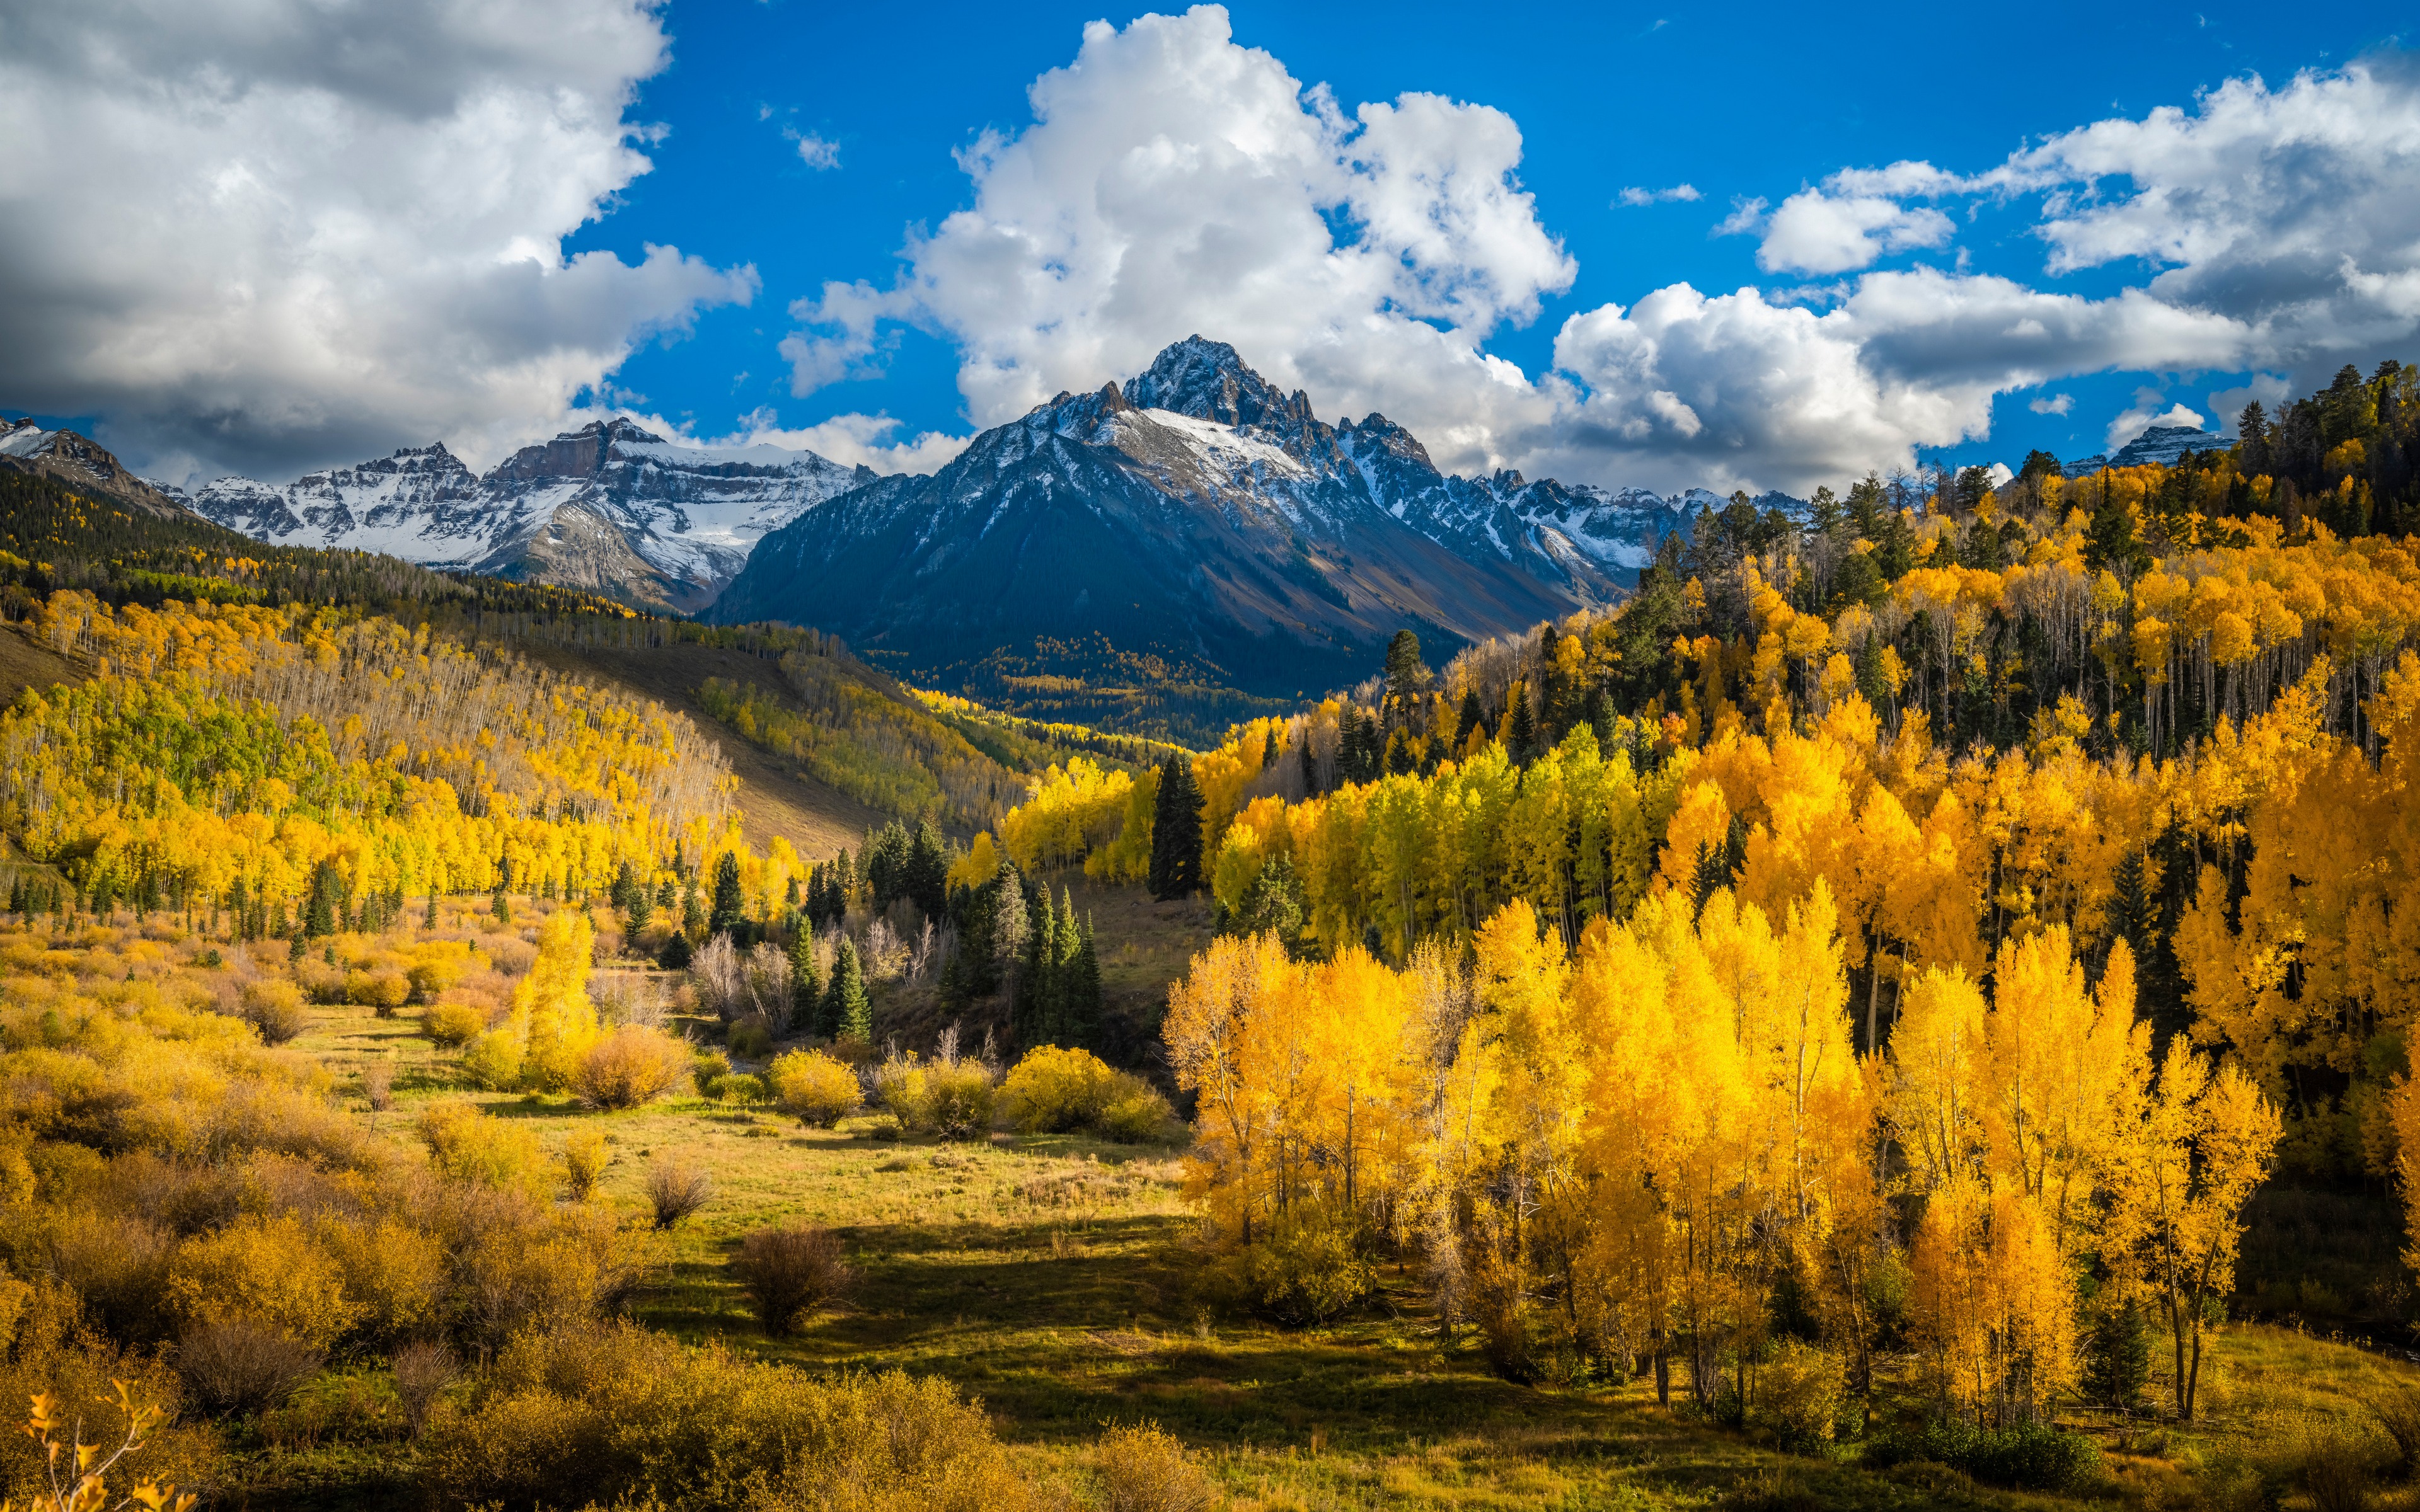 General 3840x2400 nature landscape USA Colorado fall forest mountains sky clouds trees snow